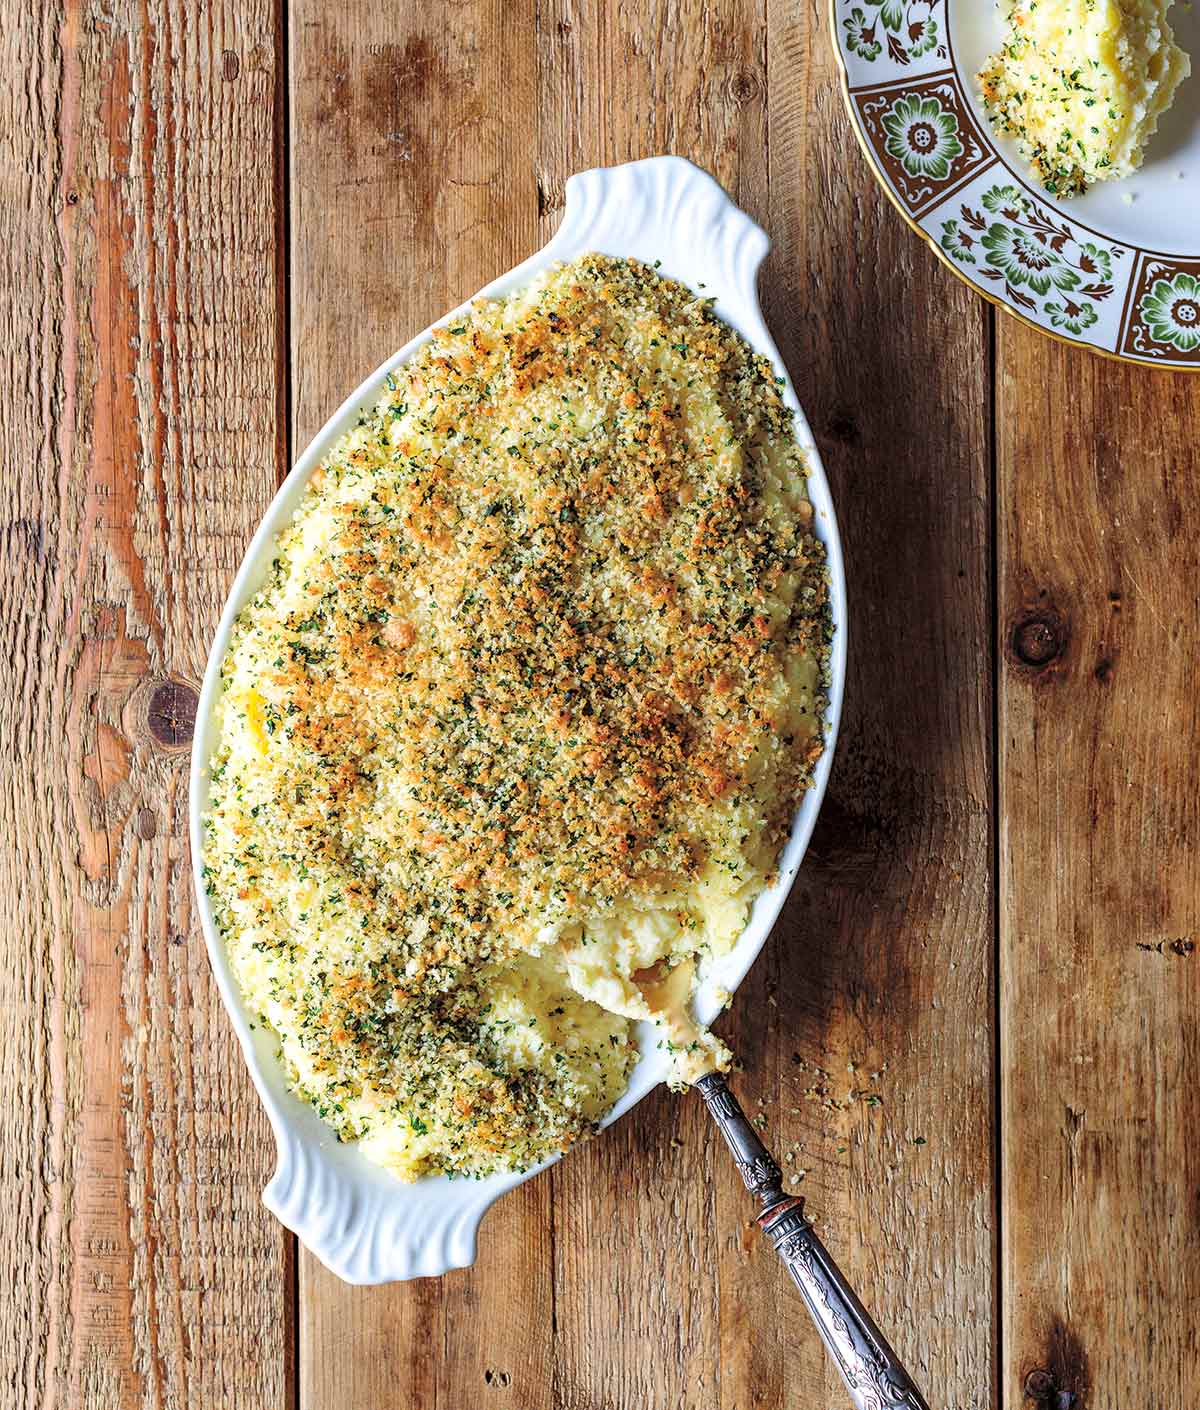 An oval serving dish filled with mashed potato gratin and a portion of it on a plate beside the dish.